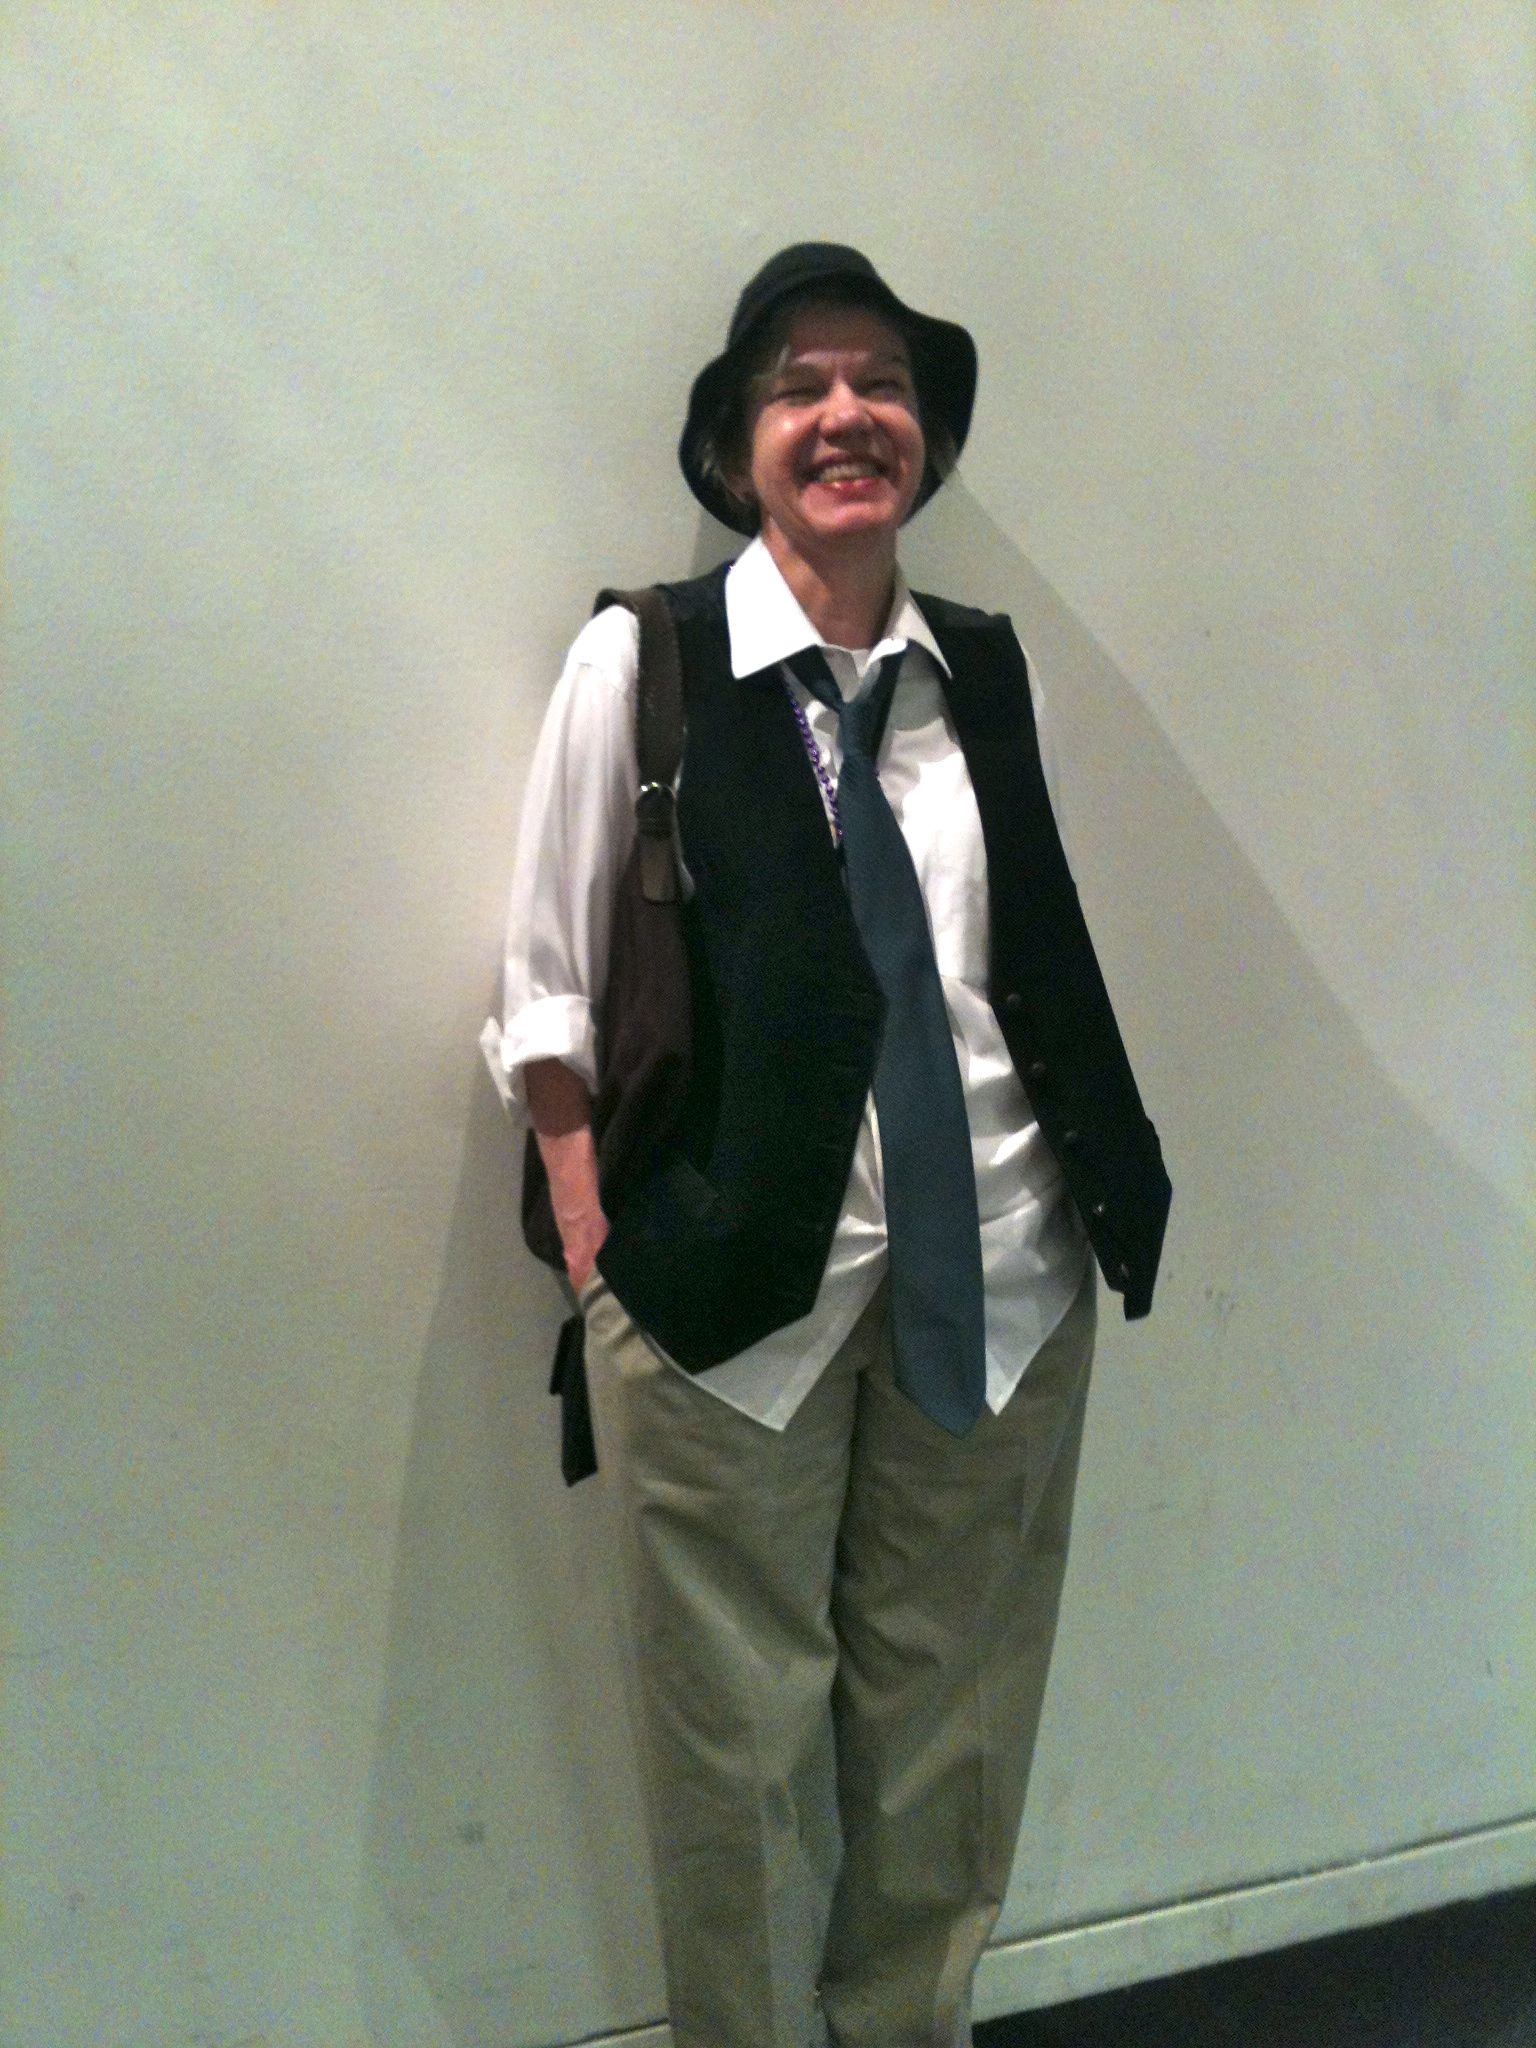 That's me as Annie Hall, thanks to Nicole.